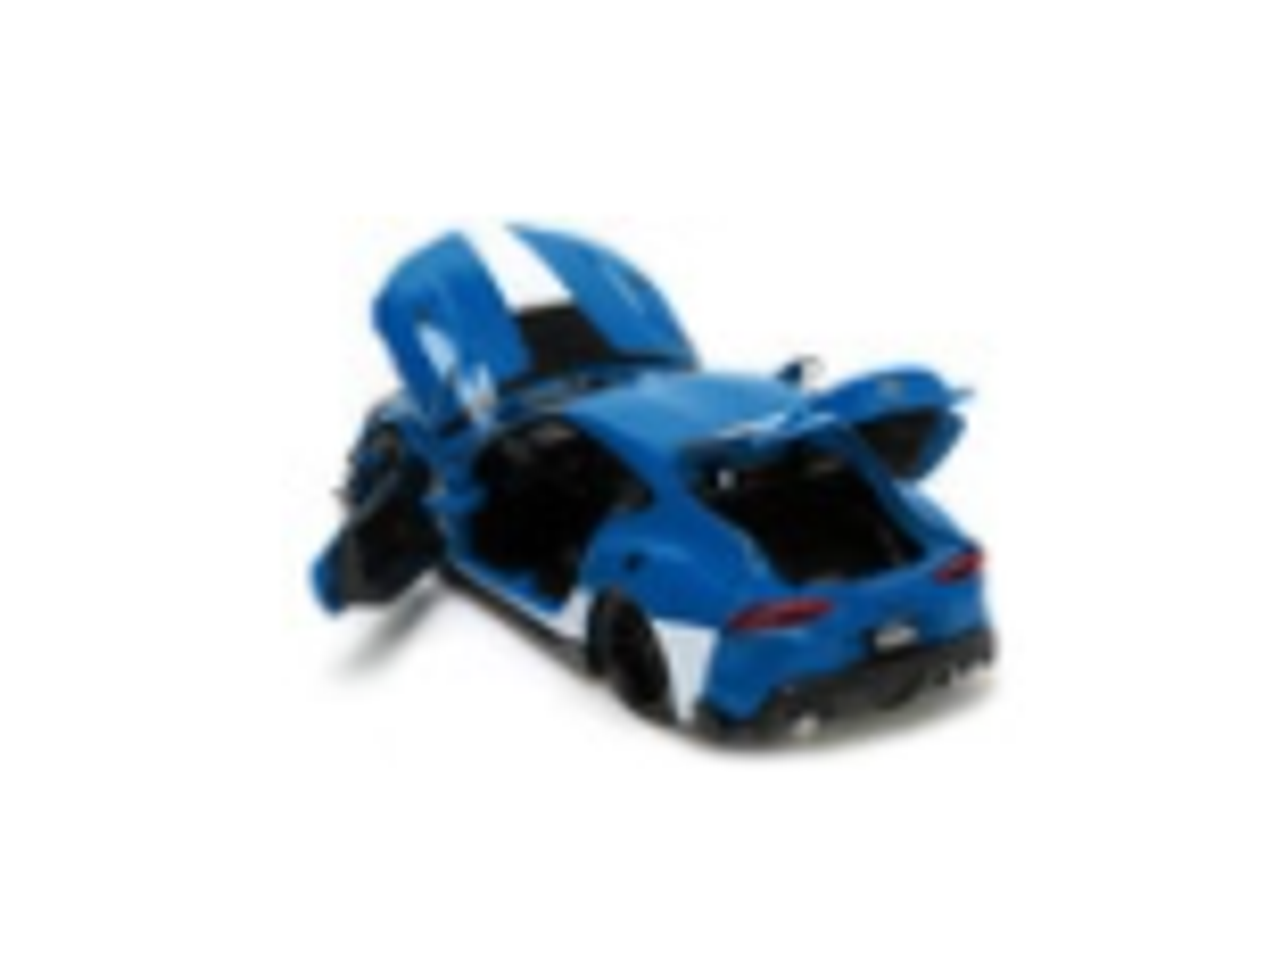 2020 Toyota Supra Blue with Graphics and Max Sterling Diecast Figurine "Robotech" "Hollywood Rides" Series 1/24 Diecast Model Car by Jada